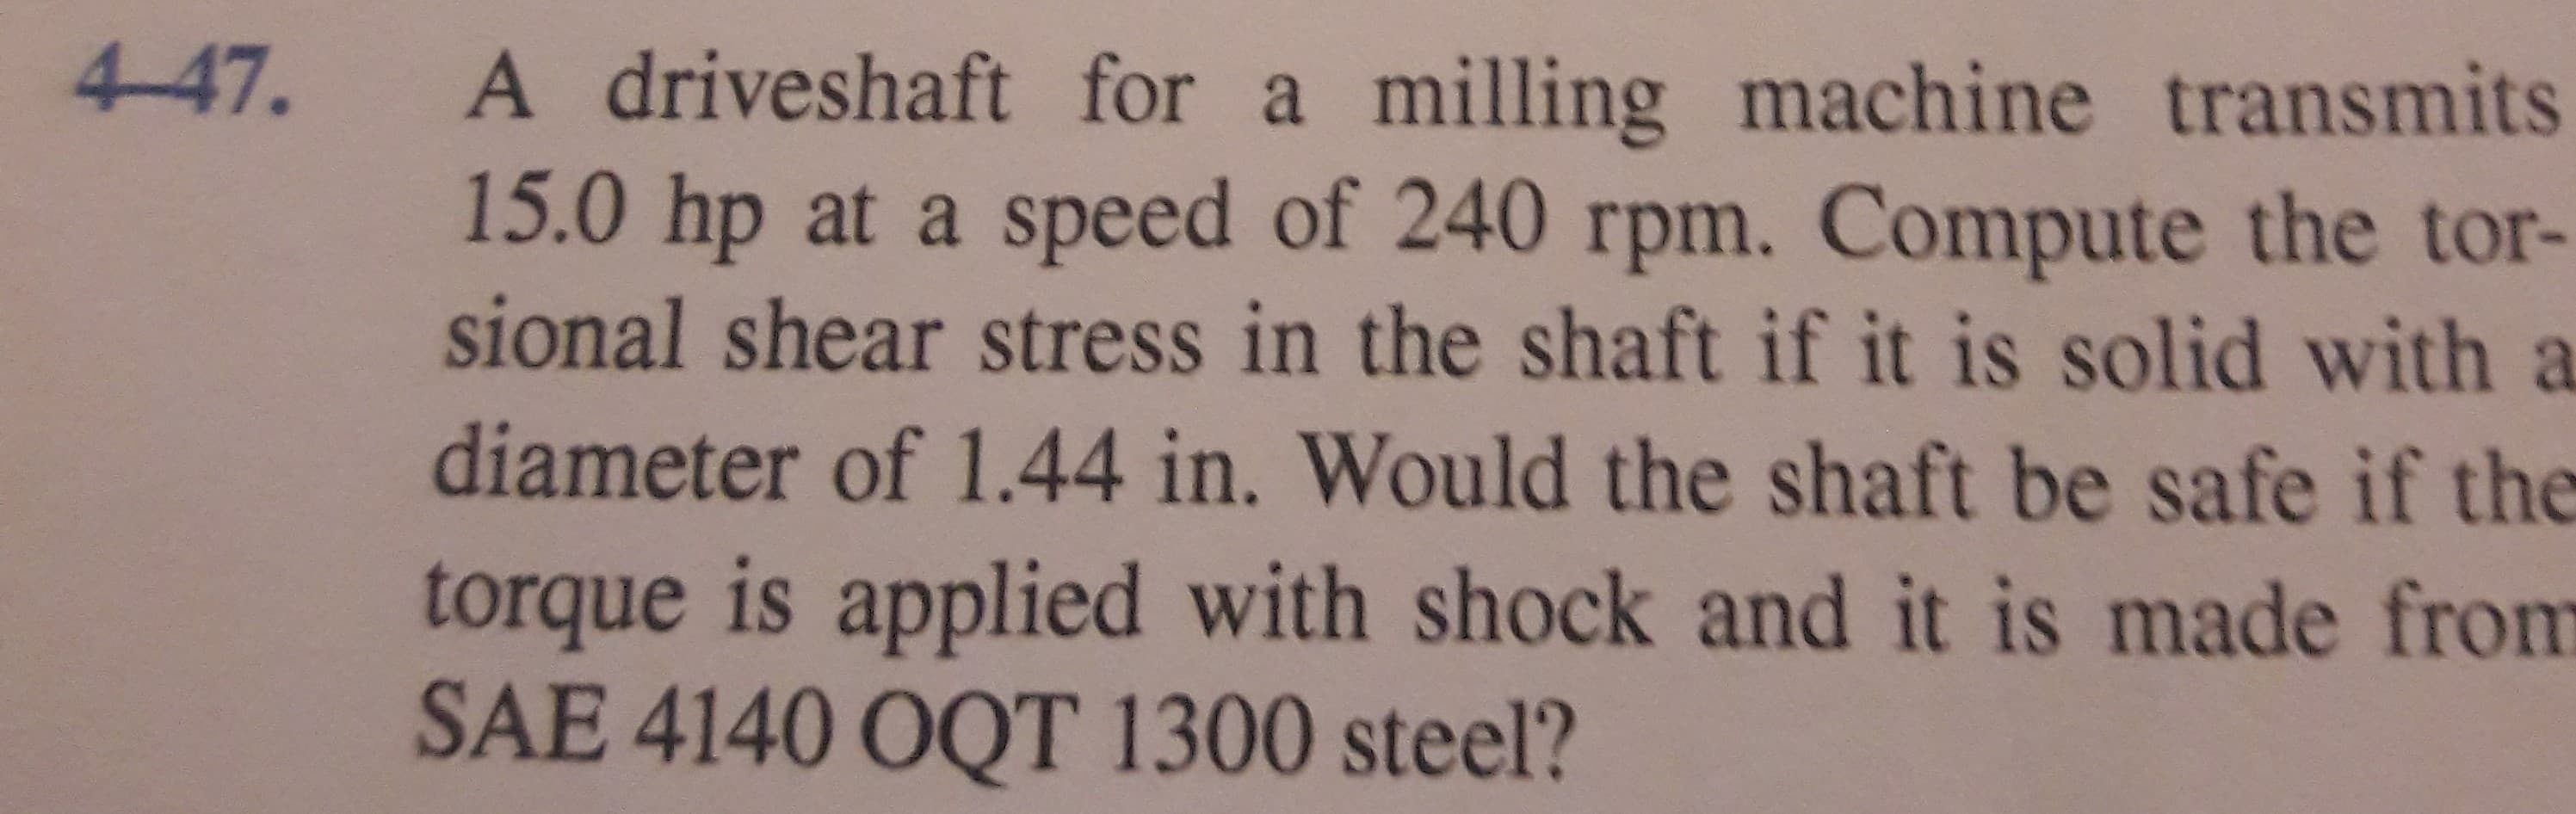 A driveshaft for a milling machine transmits
15.0 hp at a speed of 240 rpm. Compute the tor-
sional shear stress in the shaft if it is solid with a
diameter of 1.44 in. Would the shaft be safe if the
torque is applied with shock and it is made from
SAE 4140 OQT 1300 steel?
447.
